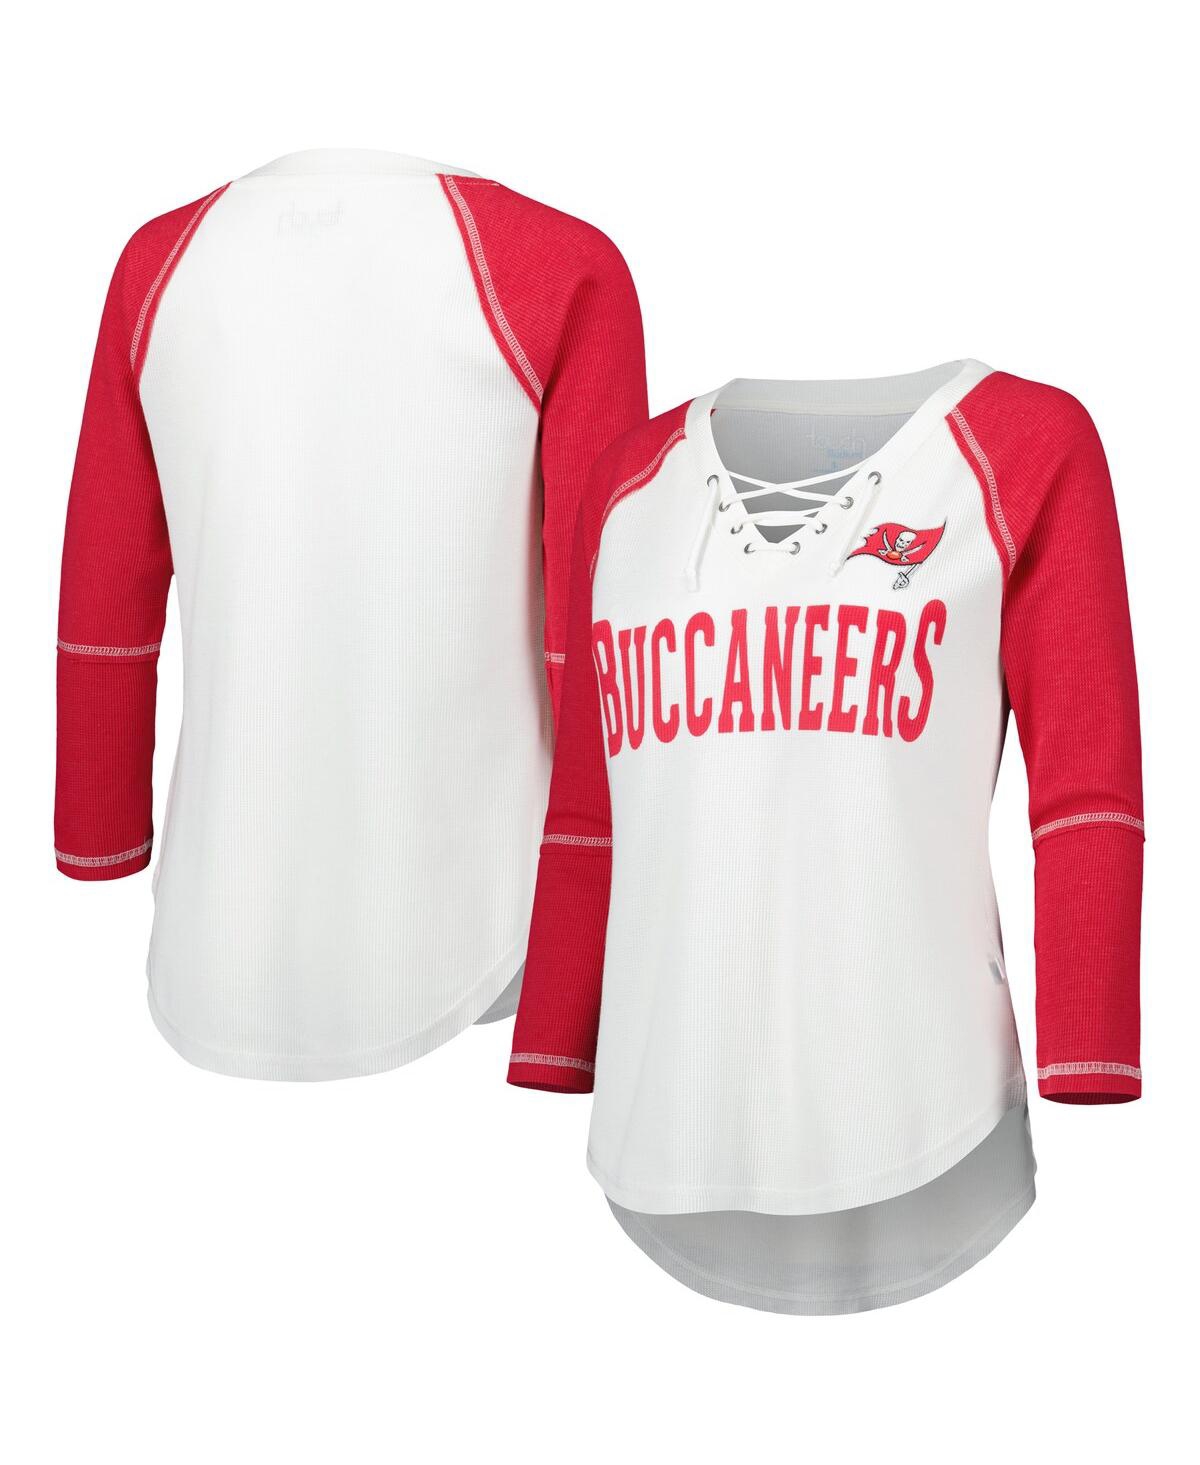 Women's Touch White, Red Tampa Bay Buccaneers Rebel Raglan Three-Quarter Sleeve Lace-Up V-Neck T-shirt - White, Red